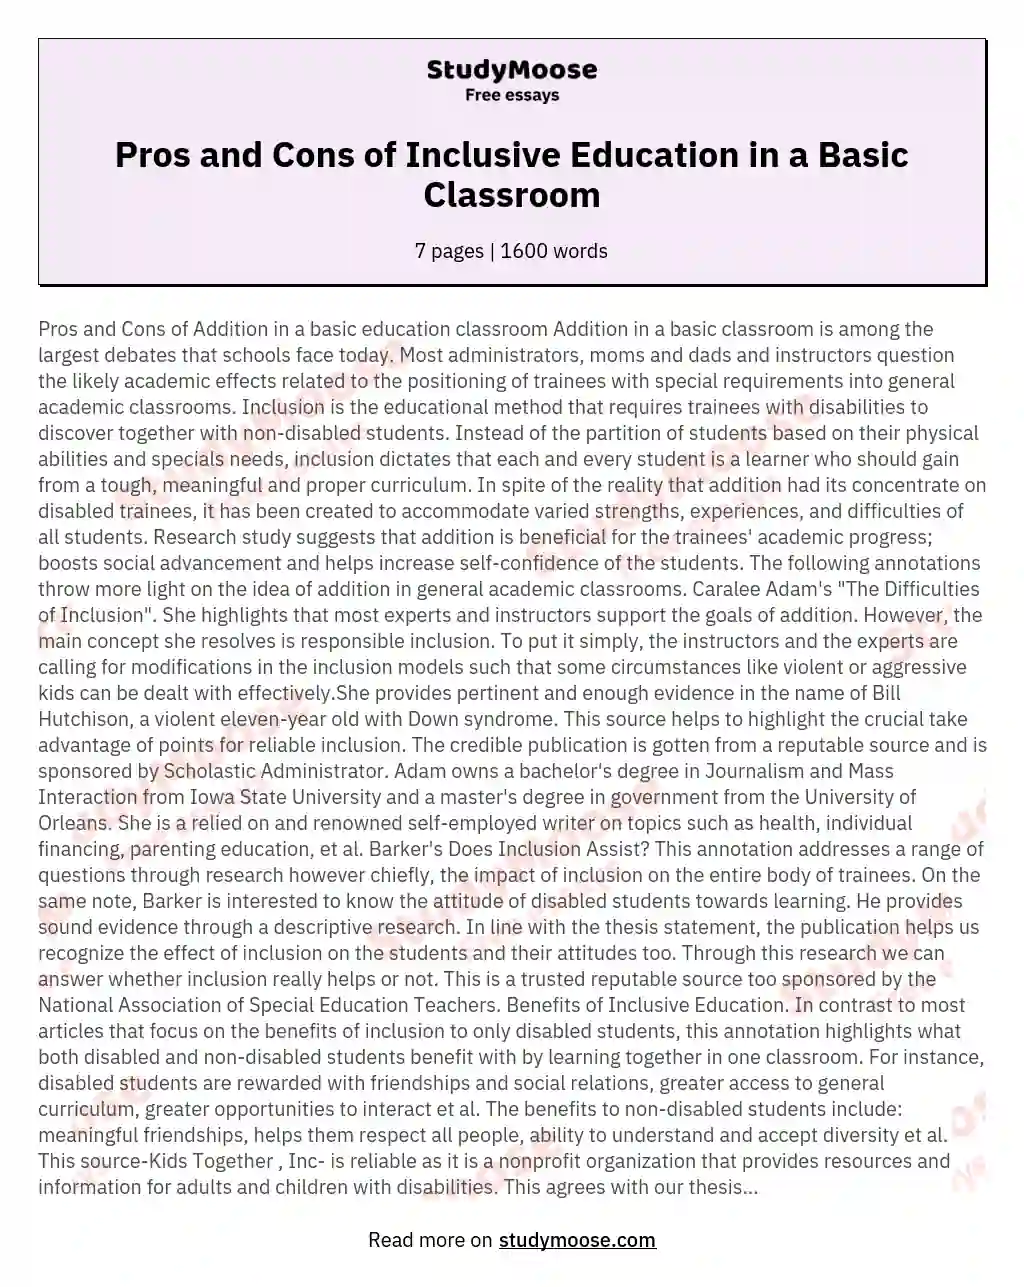 Pros and Cons of Inclusive Education in a Basic Classroom essay